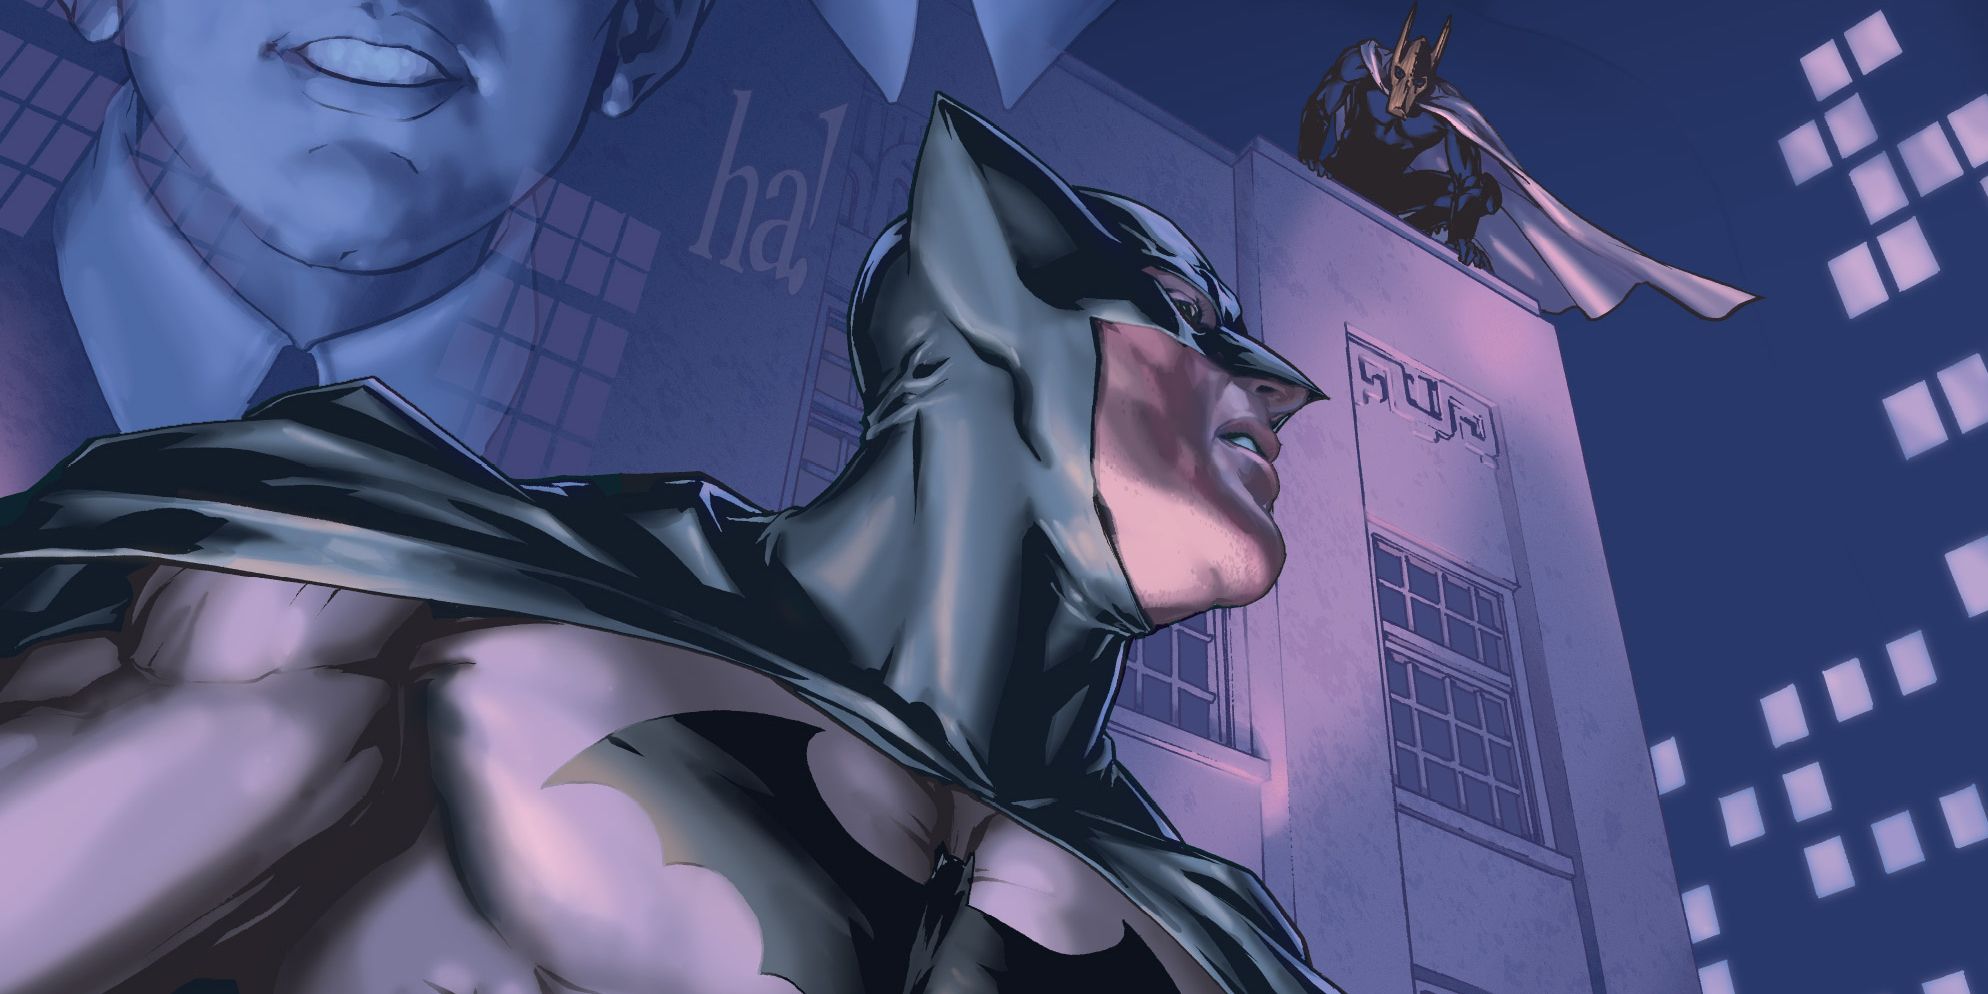 Kevin Smith's Batman Peed Himself in The Widening Gyre